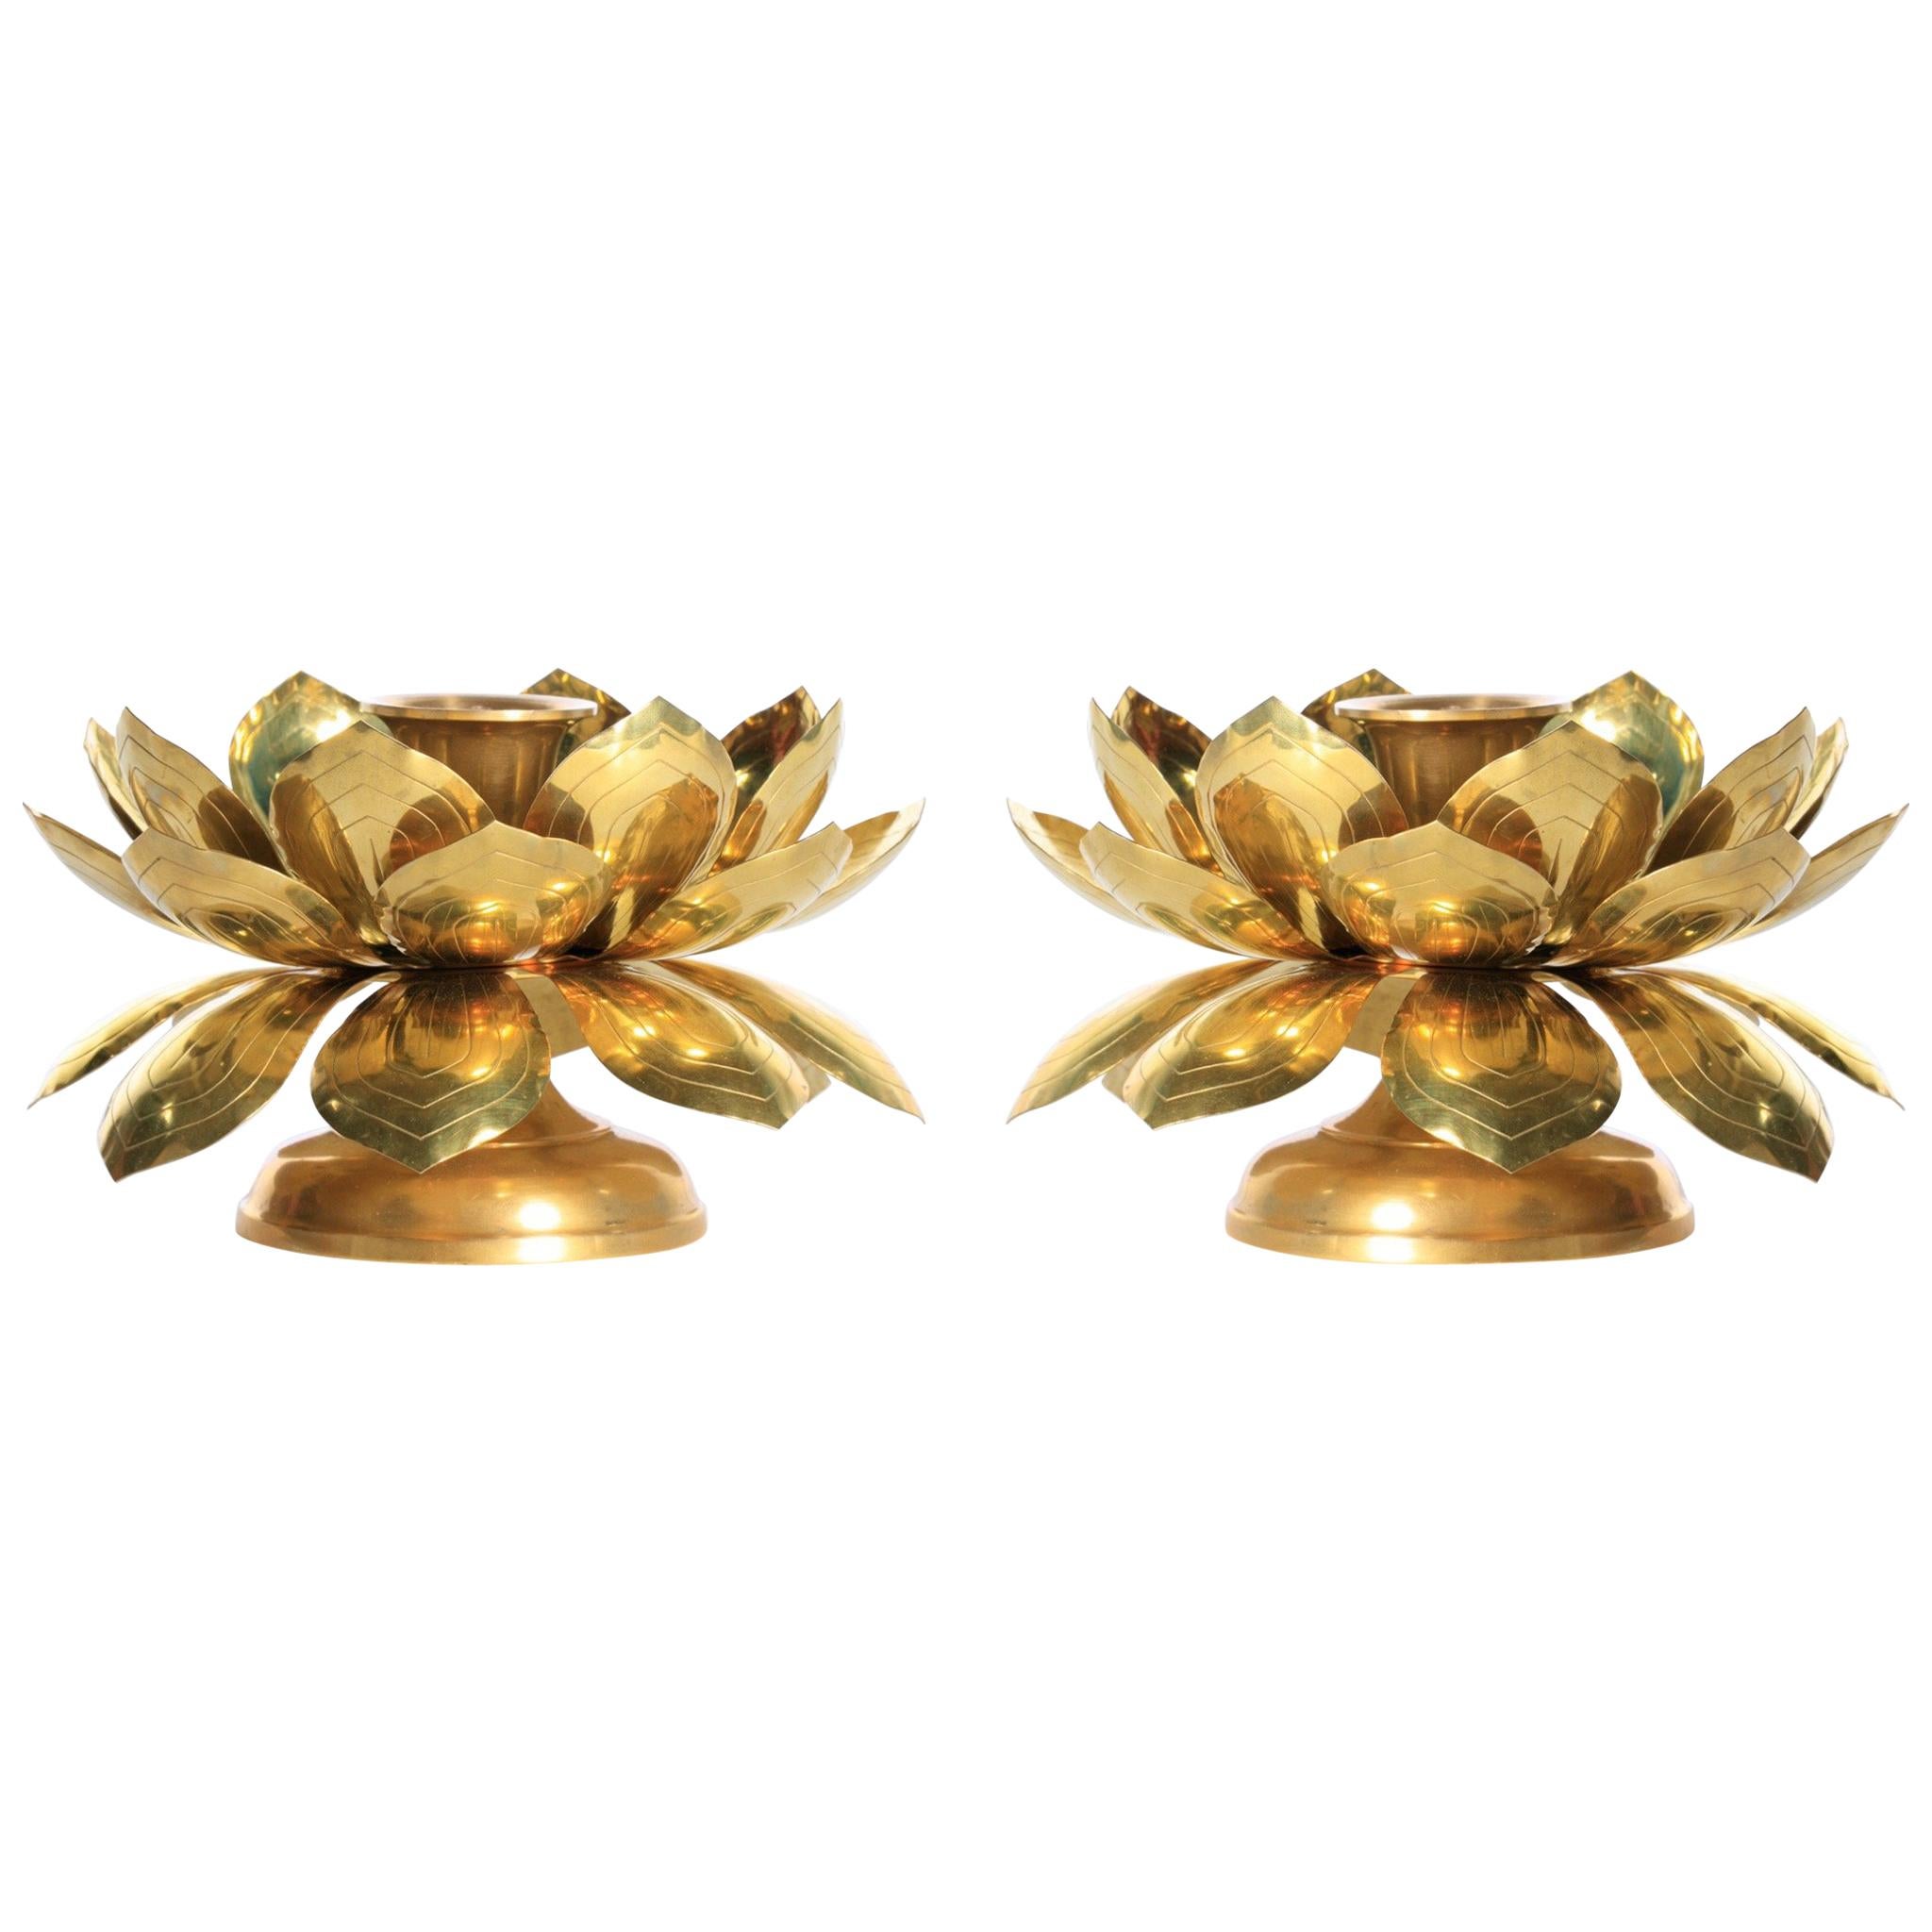 Feldman Brass Lotus Candle Holders in the Style of Parzinger